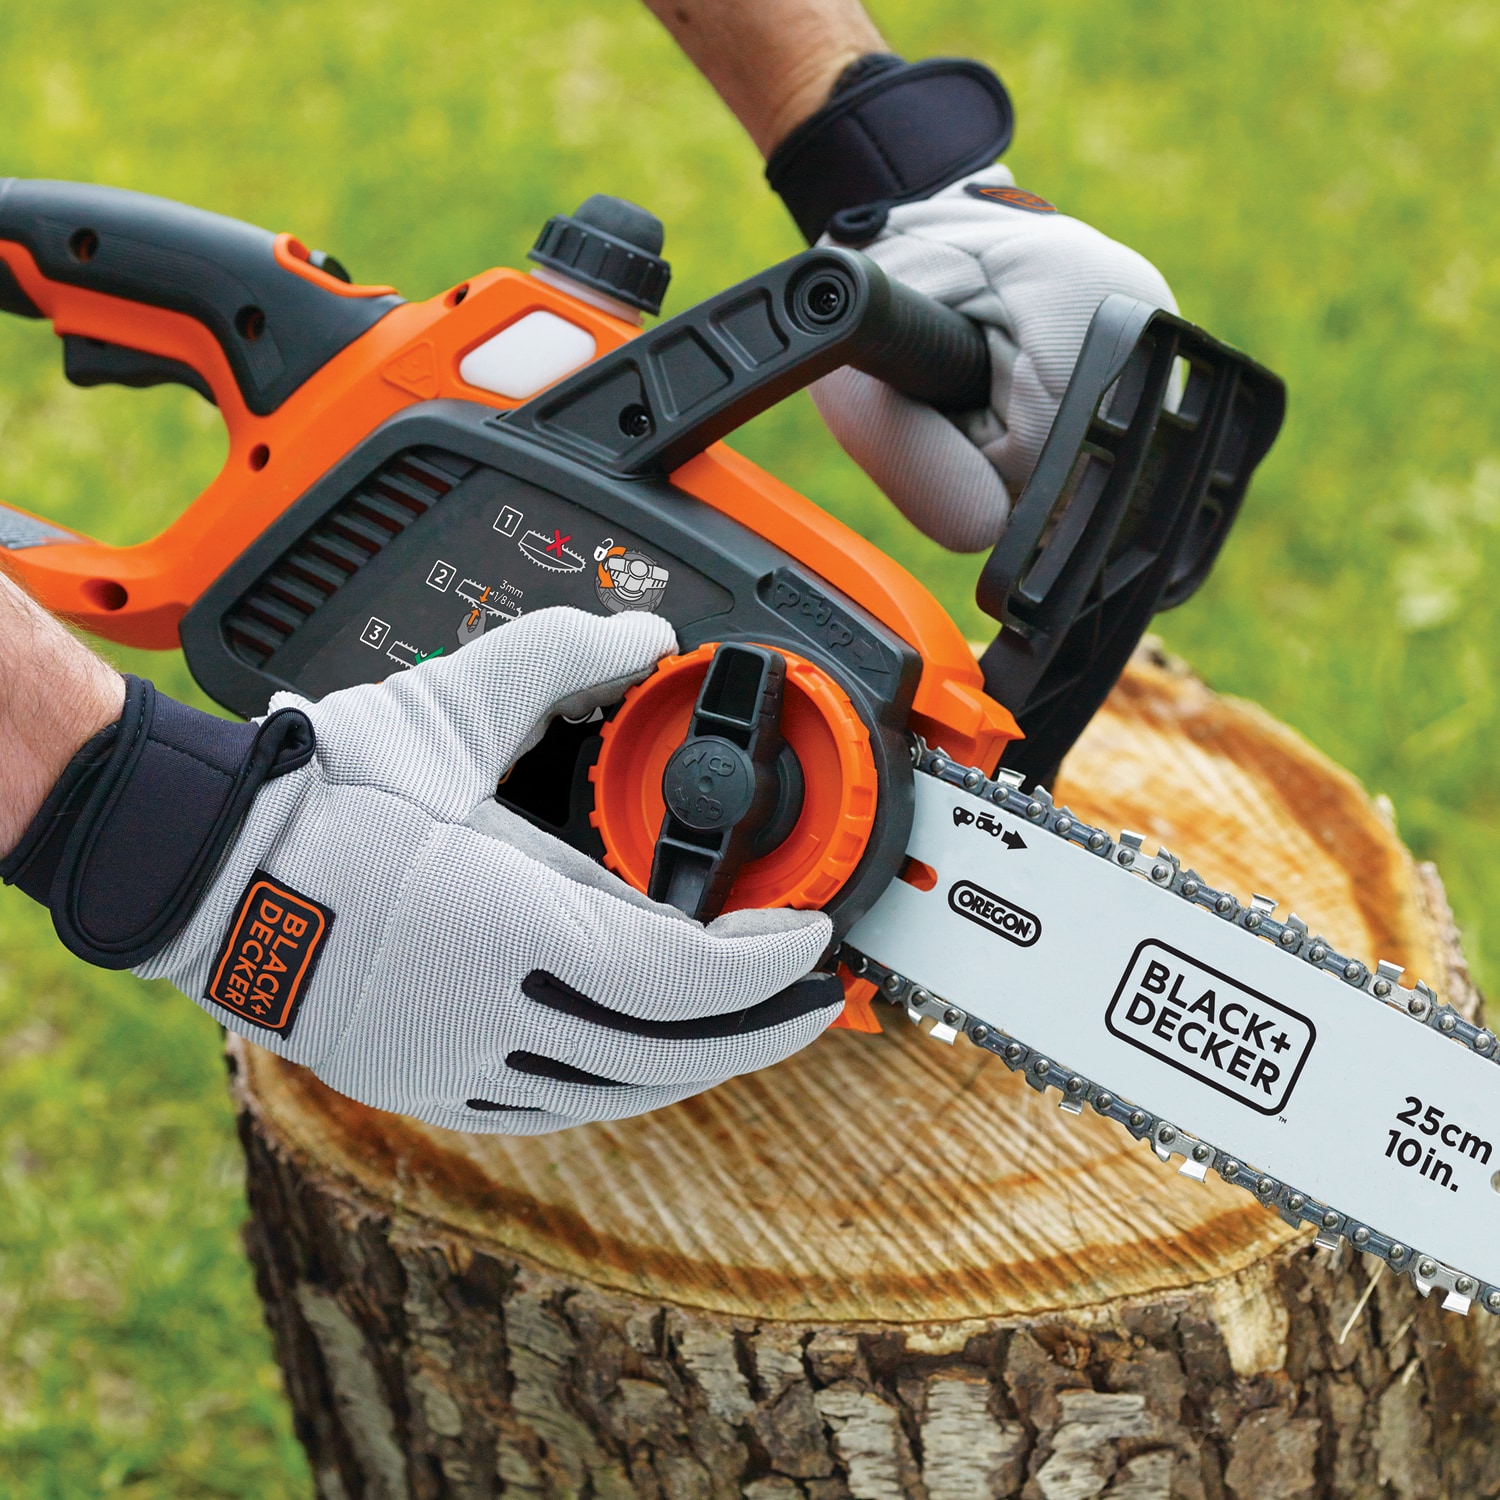 Black & Decker GK1935T 35cm 1900W Electric Chainsaw 220 volts NOT FOR USA